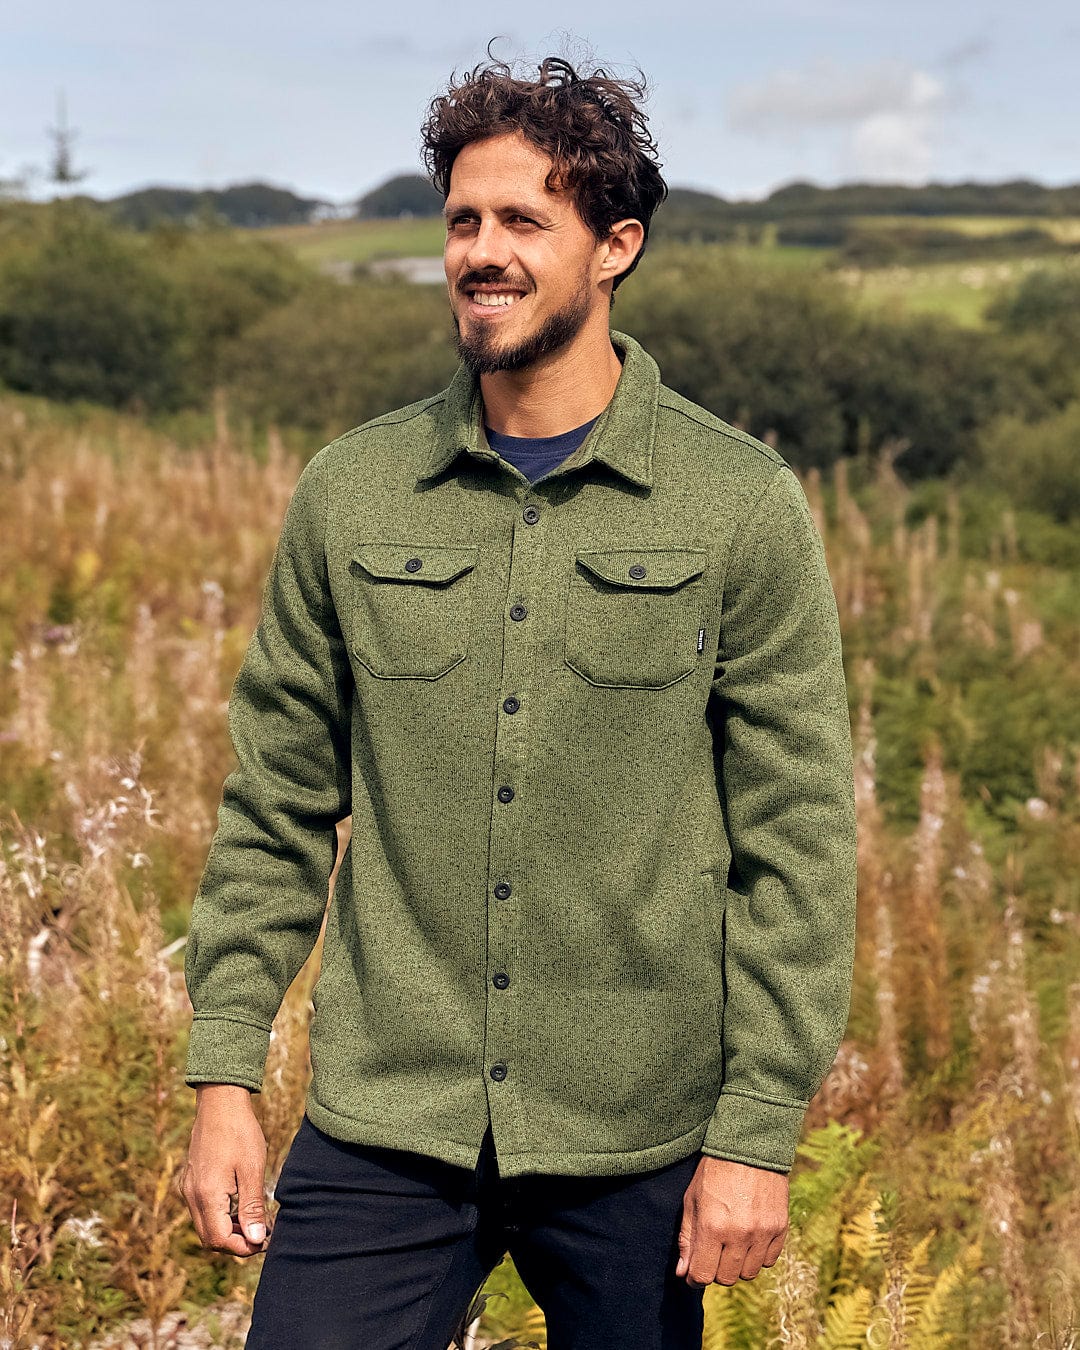 A man in a Levick - Mens Long Sleeve Shirt - Dark Green standing in a field. (Brand Name: Saltrock)